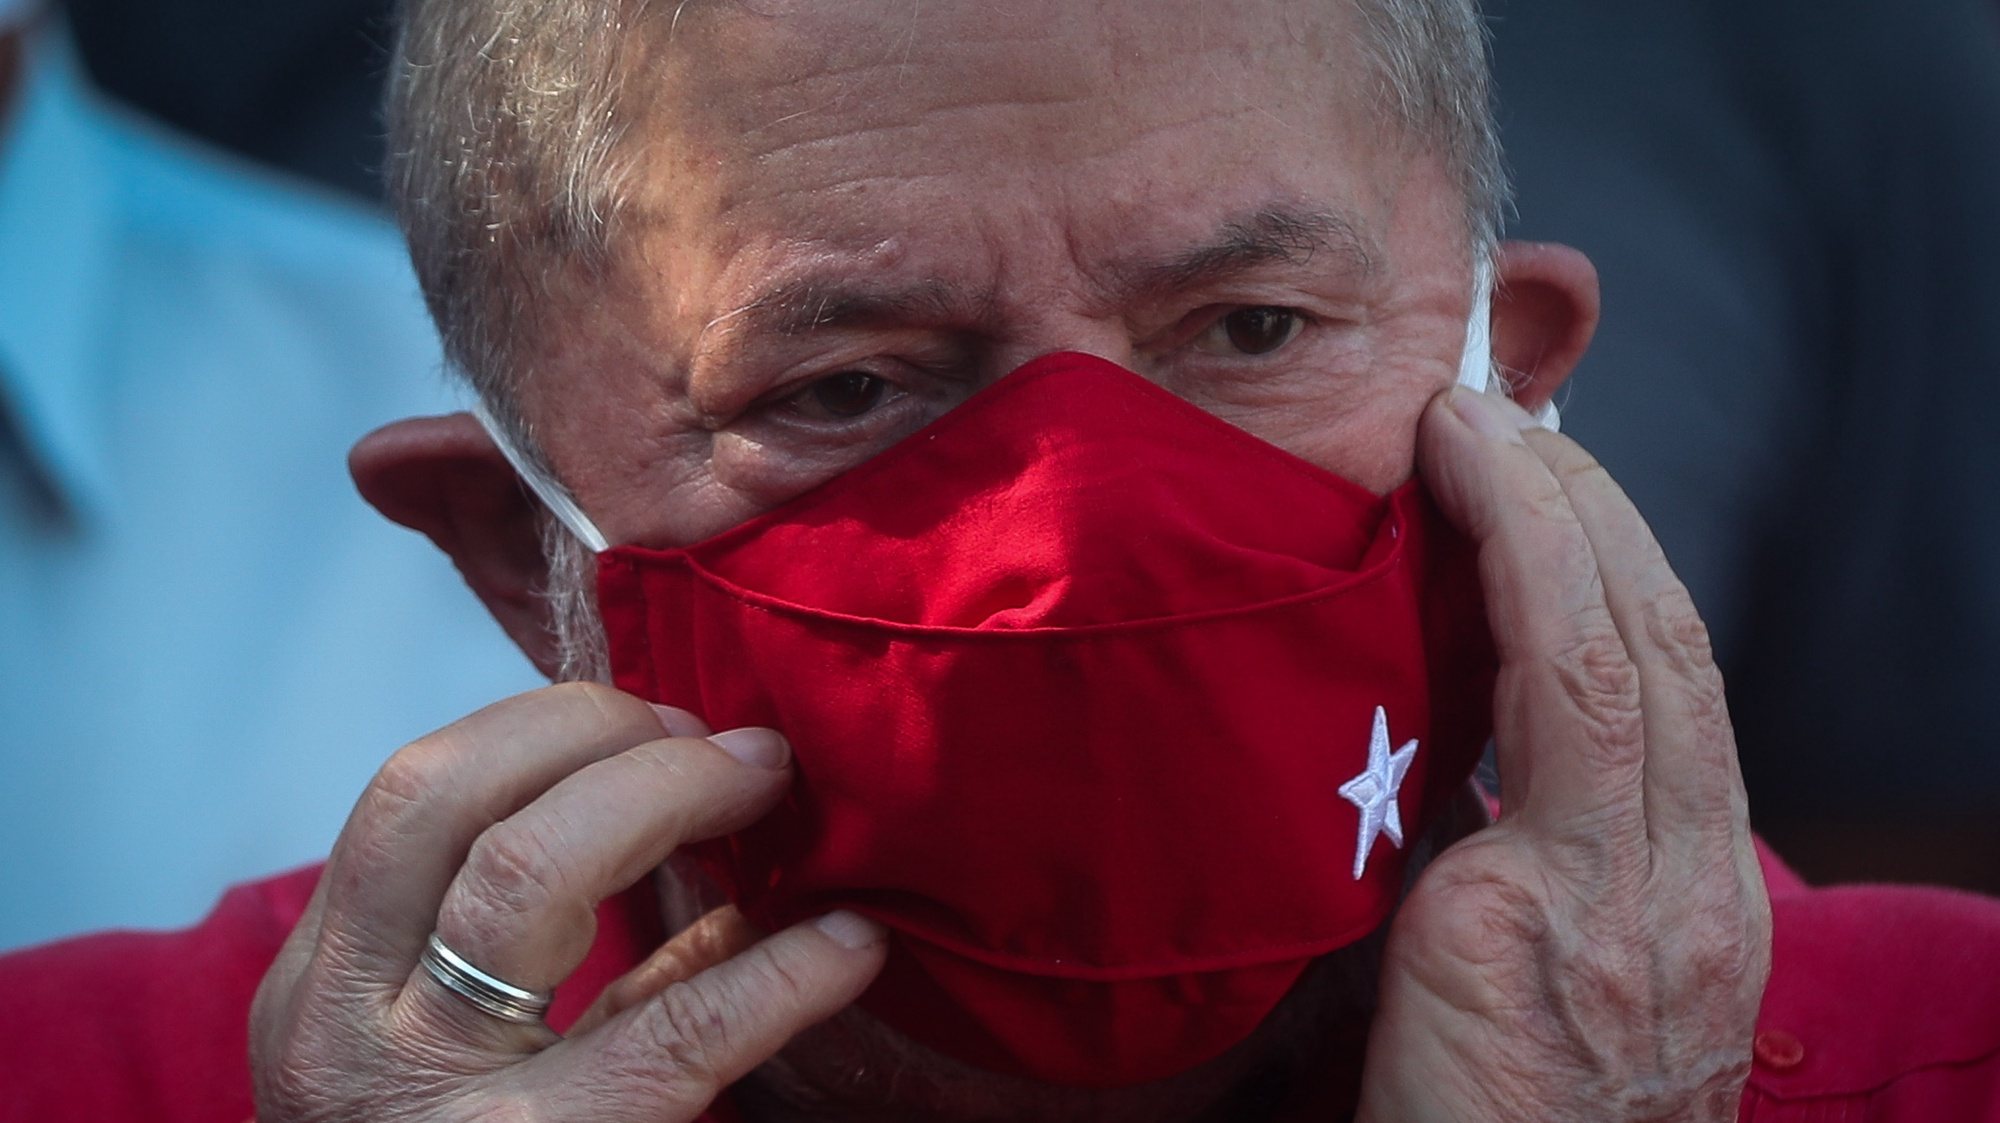 epa08822331 The Former President of Brazil, Luiz Inacio Lula da Silva, adjusts his facial mask while talking to the press after voting in Sao Bernardo do Campo, state of Sao Paulo, Brazil, 15 November 2020. Lula, president of Brazil between 2003 and 2010, voted in the country&#039;s local elections and asserted that his Workers&#039; Party (PT), &#039;will come out stronger&#039;, contradicting the forecasts of the polling institutes. &#039;It is a historic election of the PT, because I believe that it will come out very strengthened in these elections, against the doomsayers who bet on its disappearance&#039;, he told the press.  EPA/FERNANDO BIZERRA